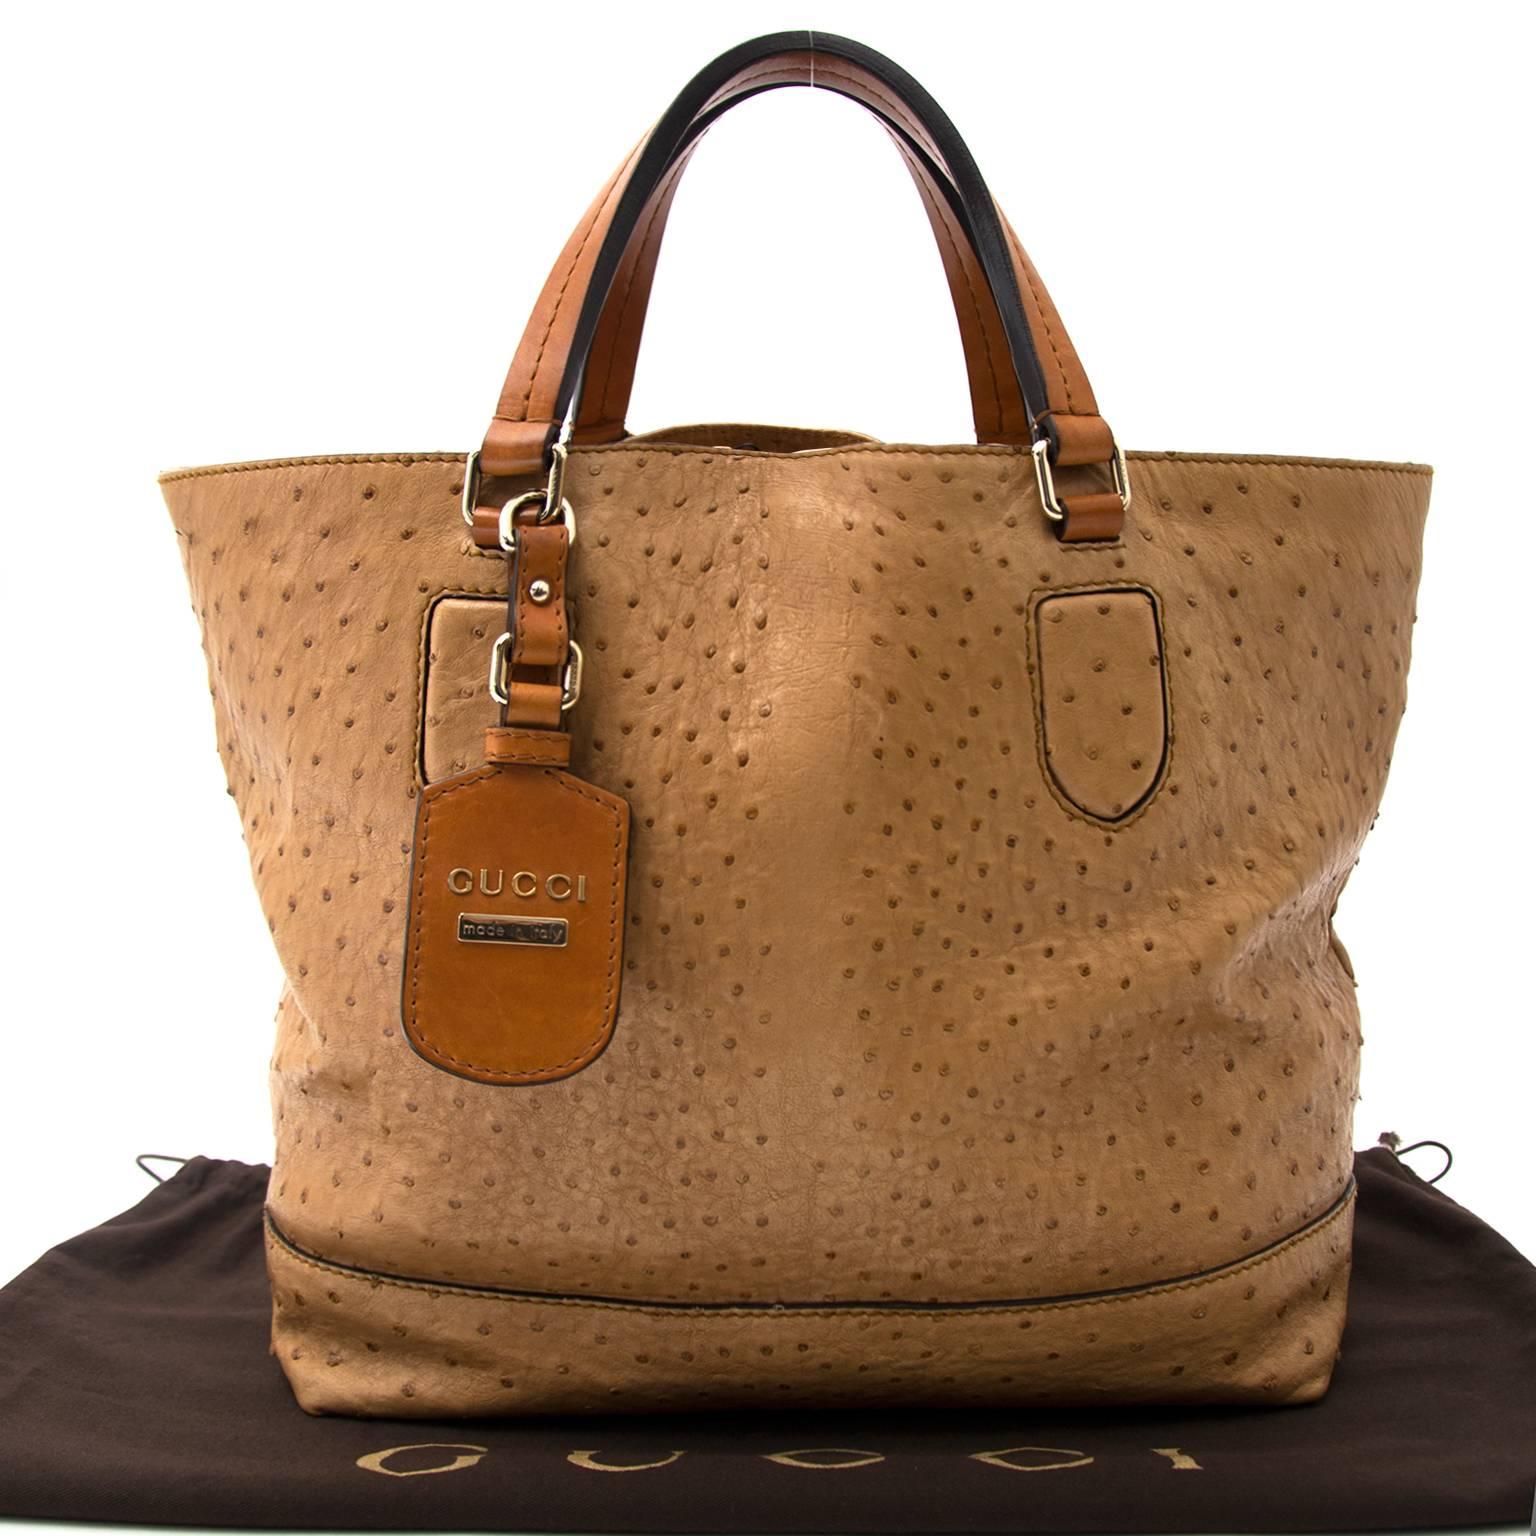 Very Good Preloved Condition

Estimated Retail Price: € 3500,00 ,-

Gucci Madison Cognac Ostrich  Medium Tote

This amazing tote is perfect for when you're going shopping or simply running errands. The very spacious interior will allow you to store